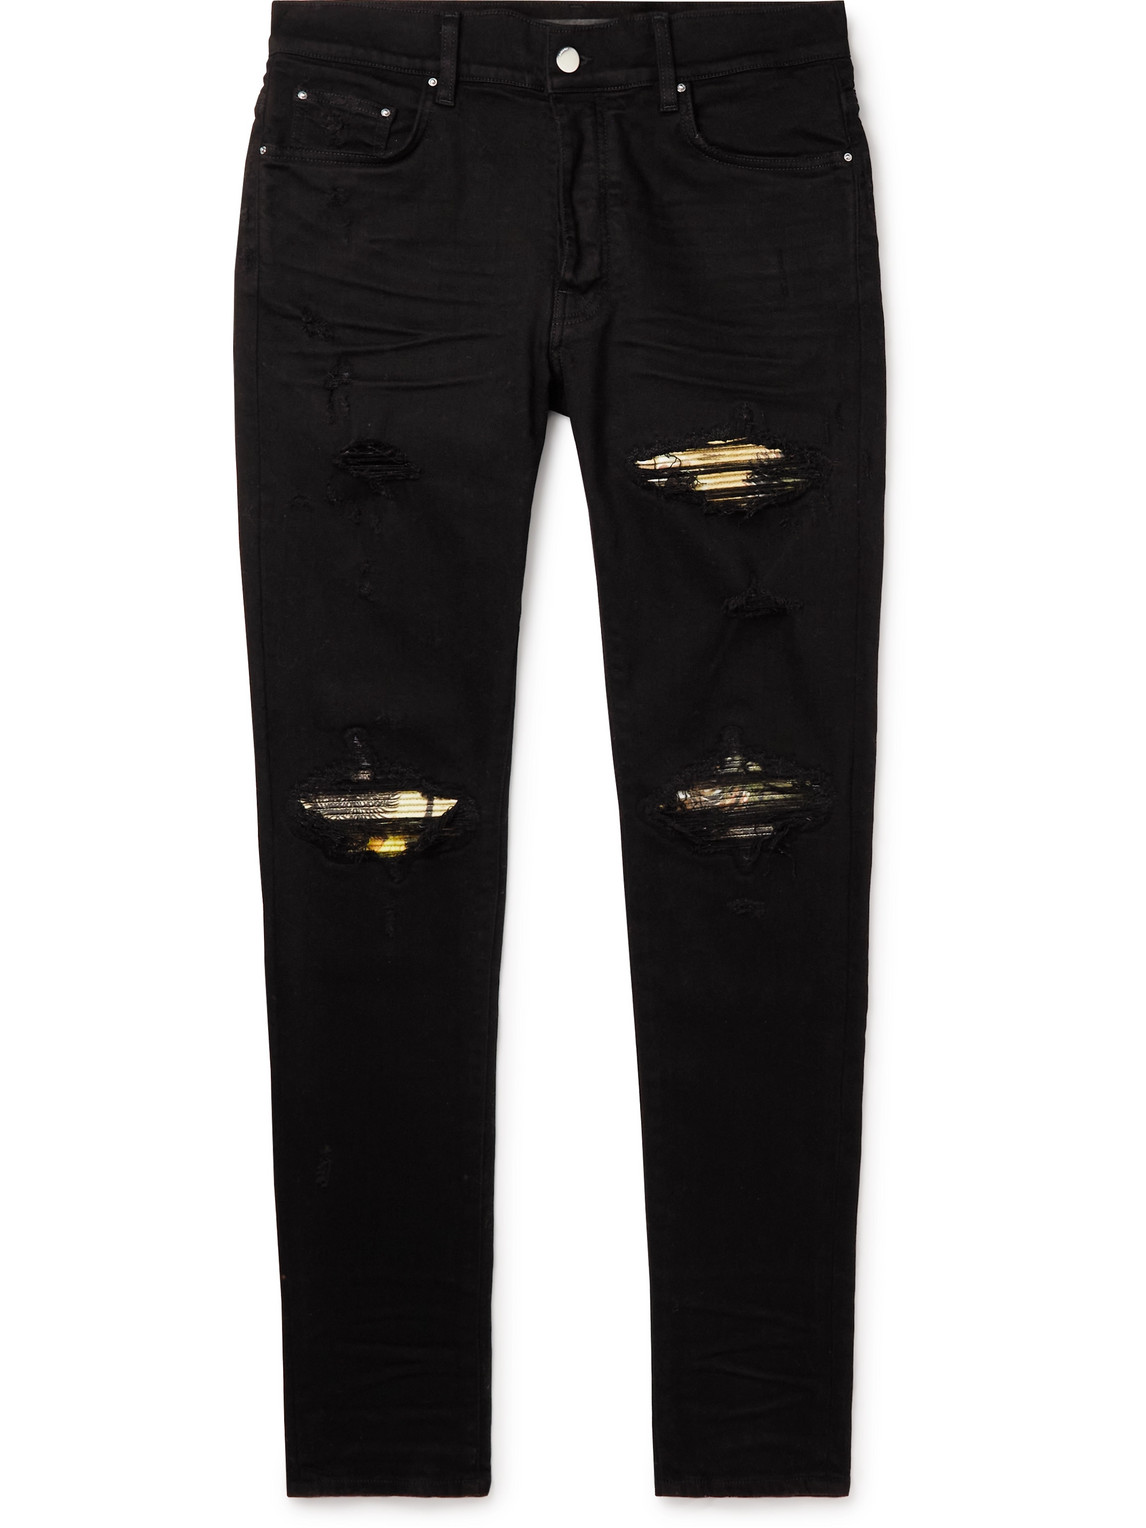 MX1 Panelled Distressed Skinny Jeans